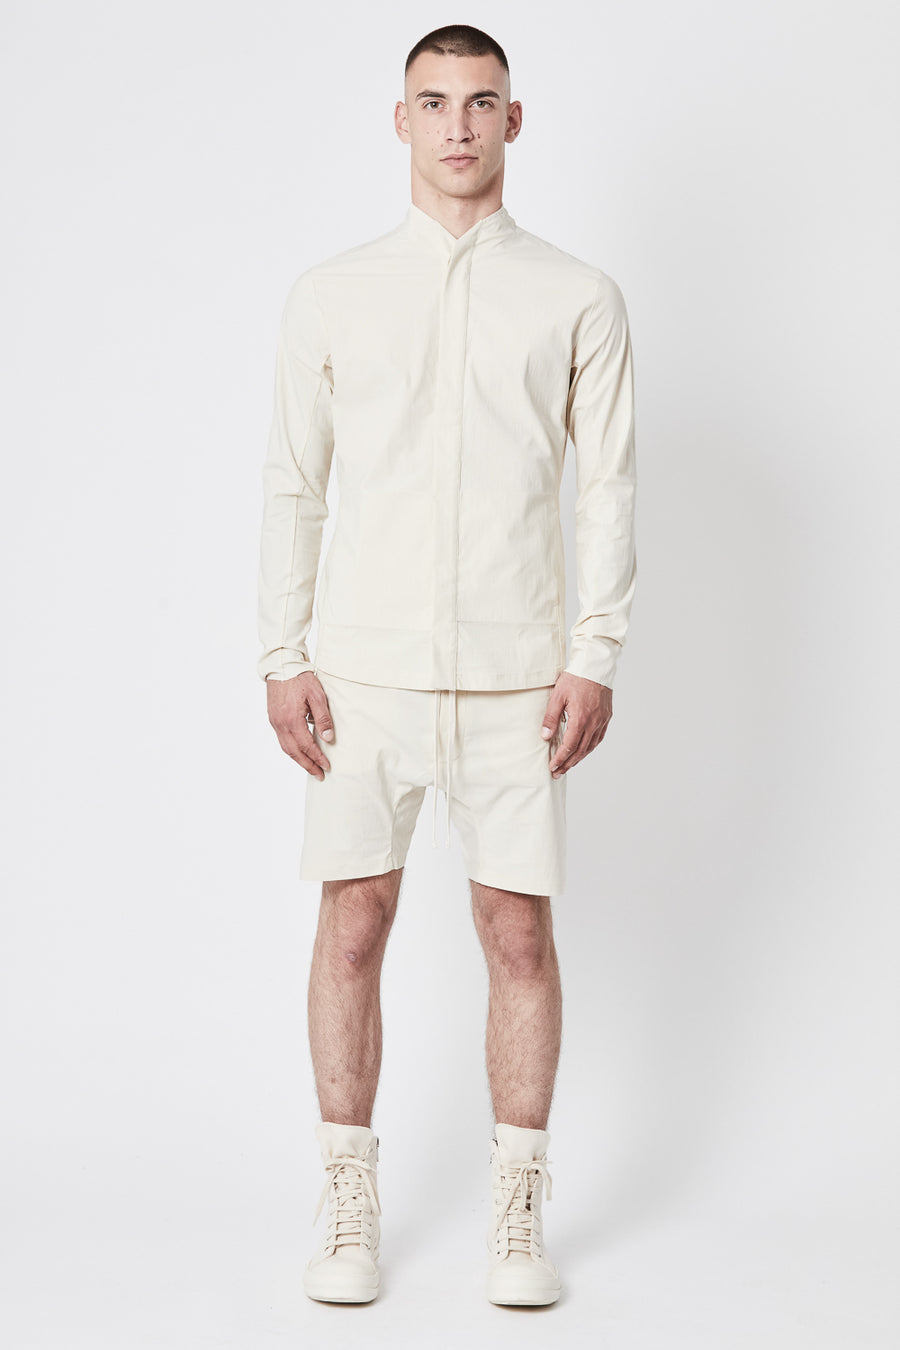 Buy the Thom Krom M SJ 580 Jacket in Ivory at Intro. Spend £50 for free UK delivery. Official stockists. We ship worldwide.